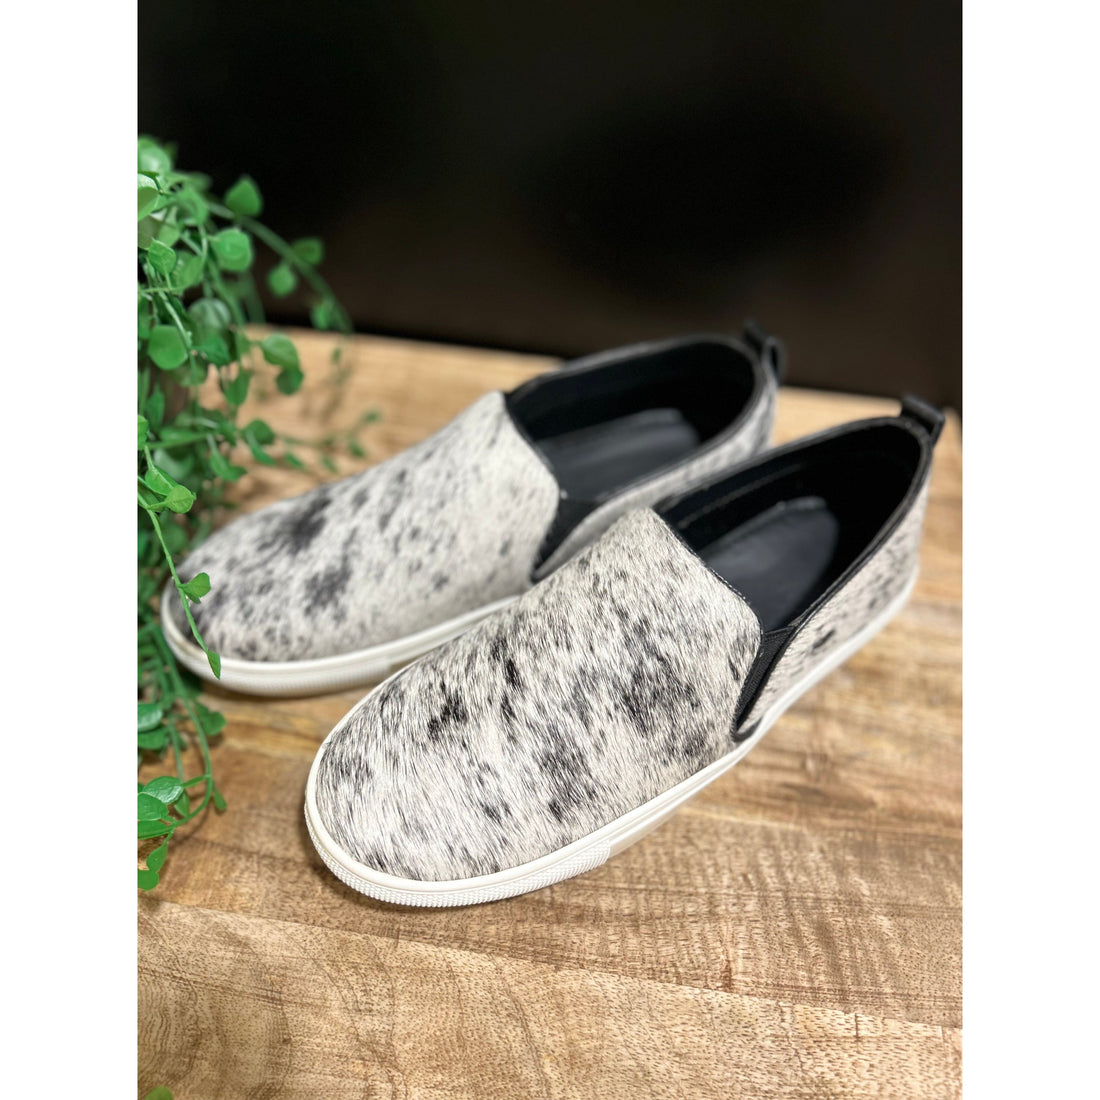 Slip on Black and White Shoes Size 38 